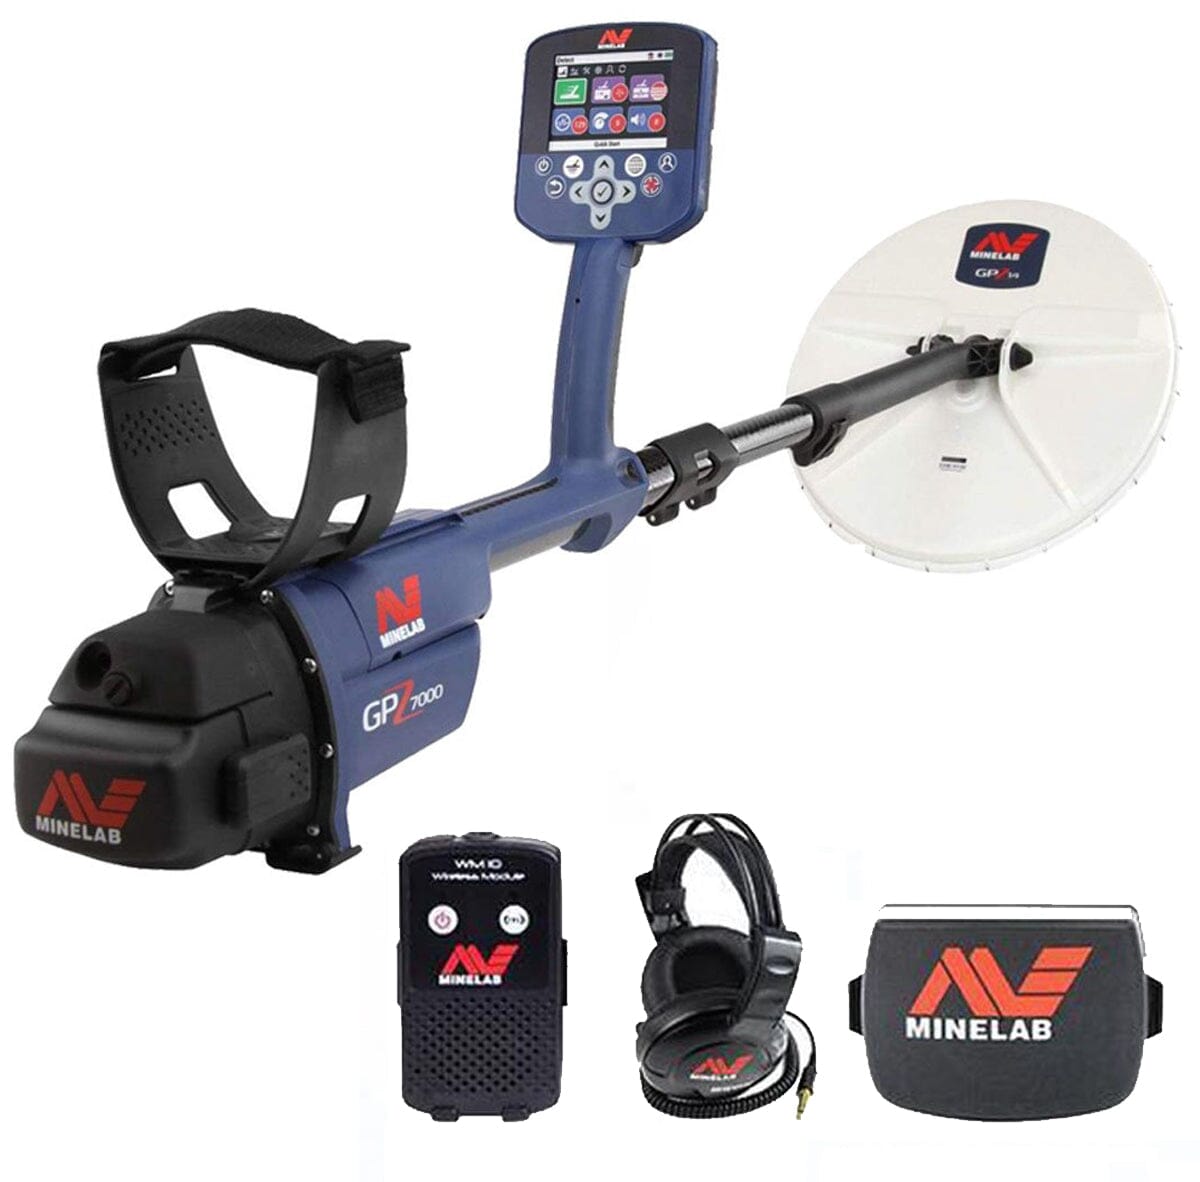 Minelab GPZ 7000 All Terrain Gold Metal Detector and Gold Monster 1000